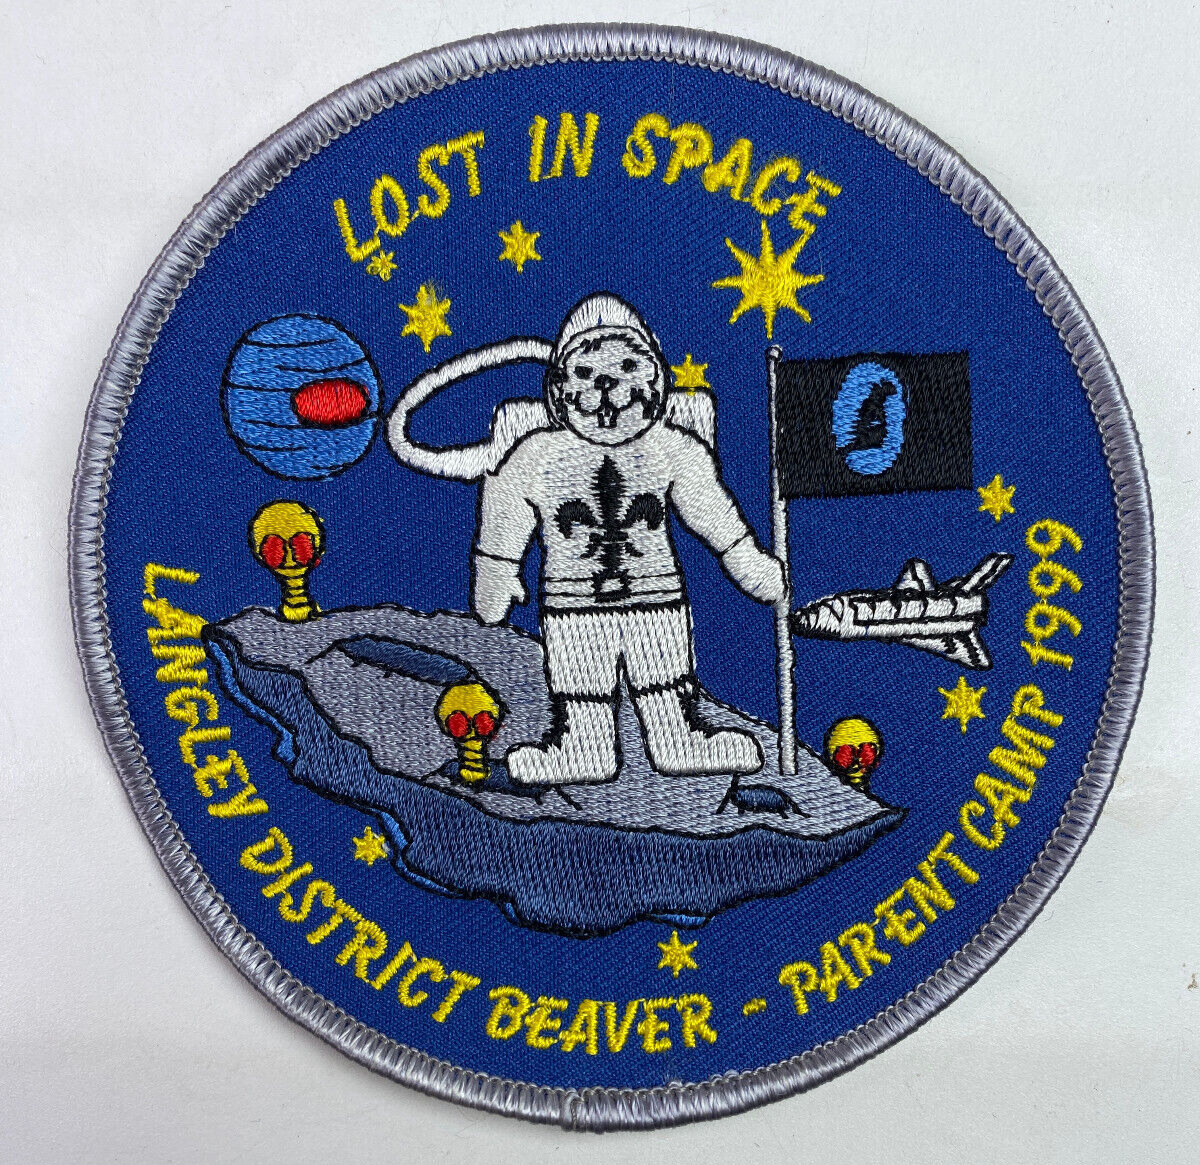 1999 Langley District Beaver Parent Camp Lost In Space Boy Scouts BSA Patch H2